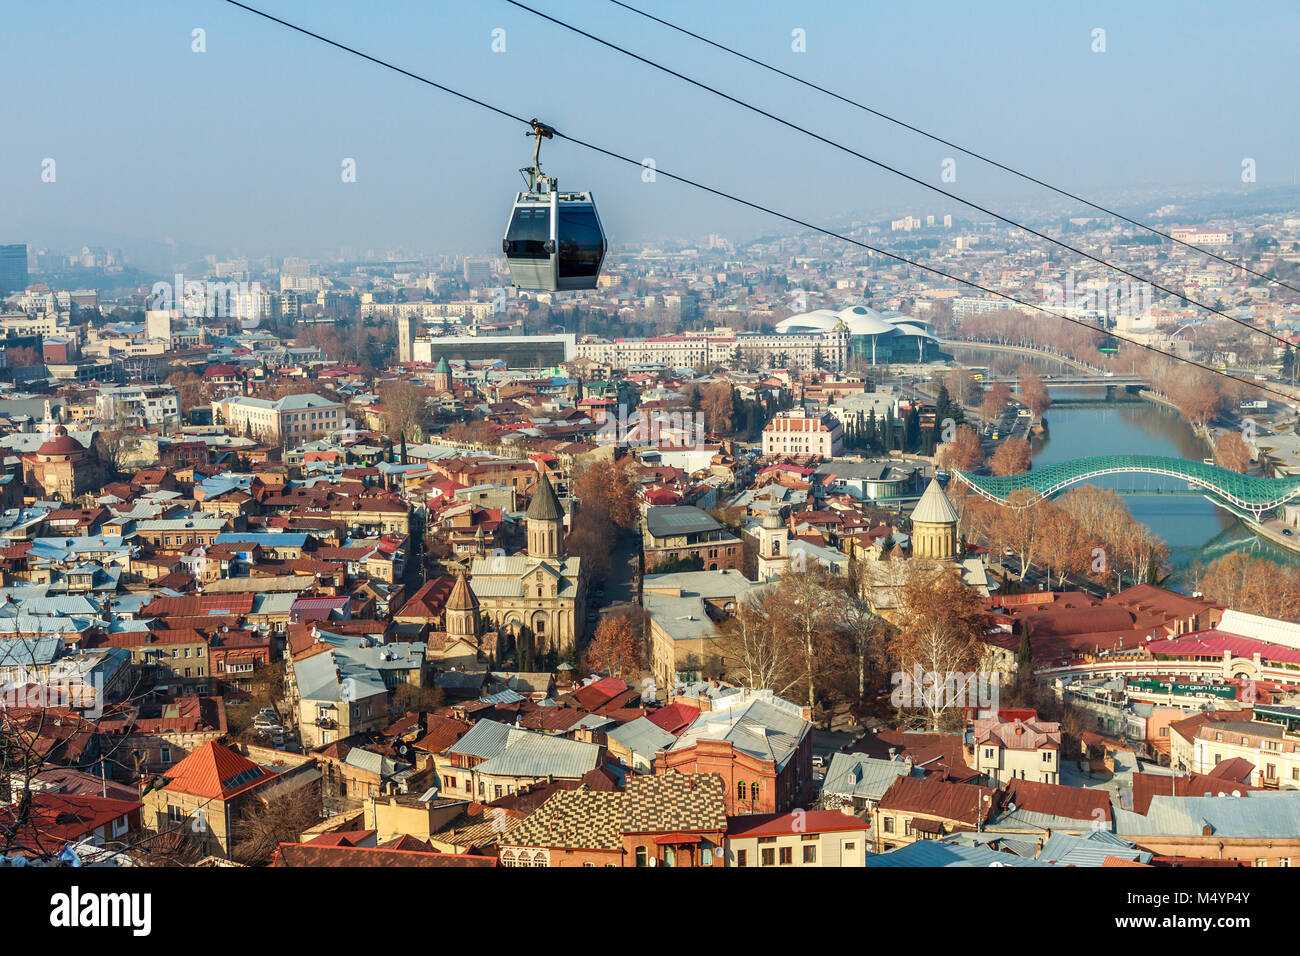 Tbilisi old city streets, Kura river, with old cathedrals and cable car in the foreground, Georgia Stock Photo